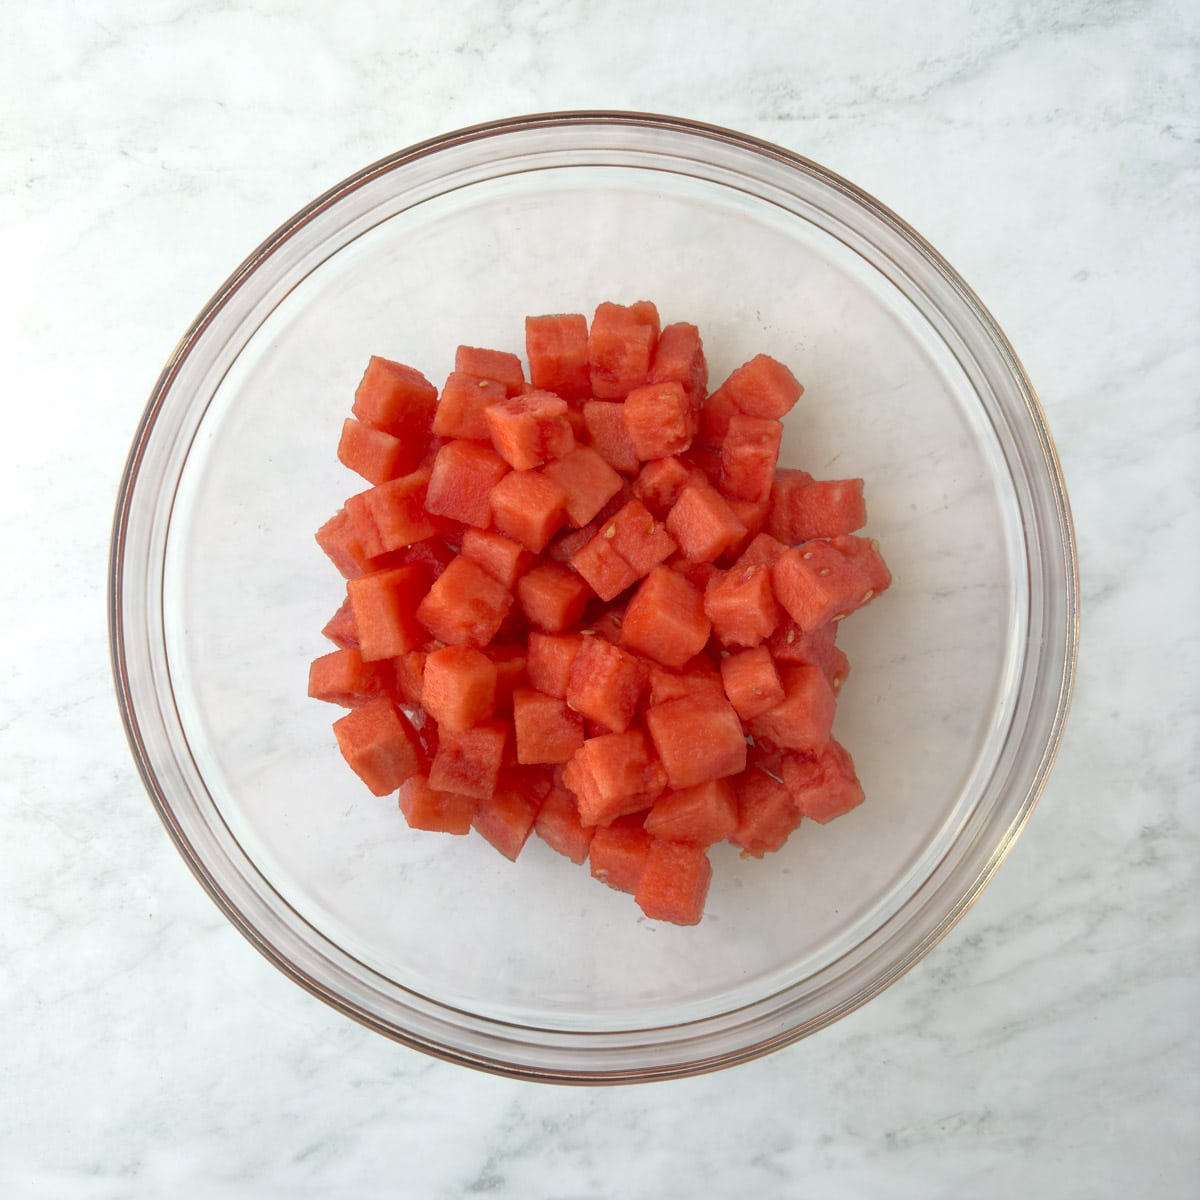 Red watermelon cubes in a glass bowl.